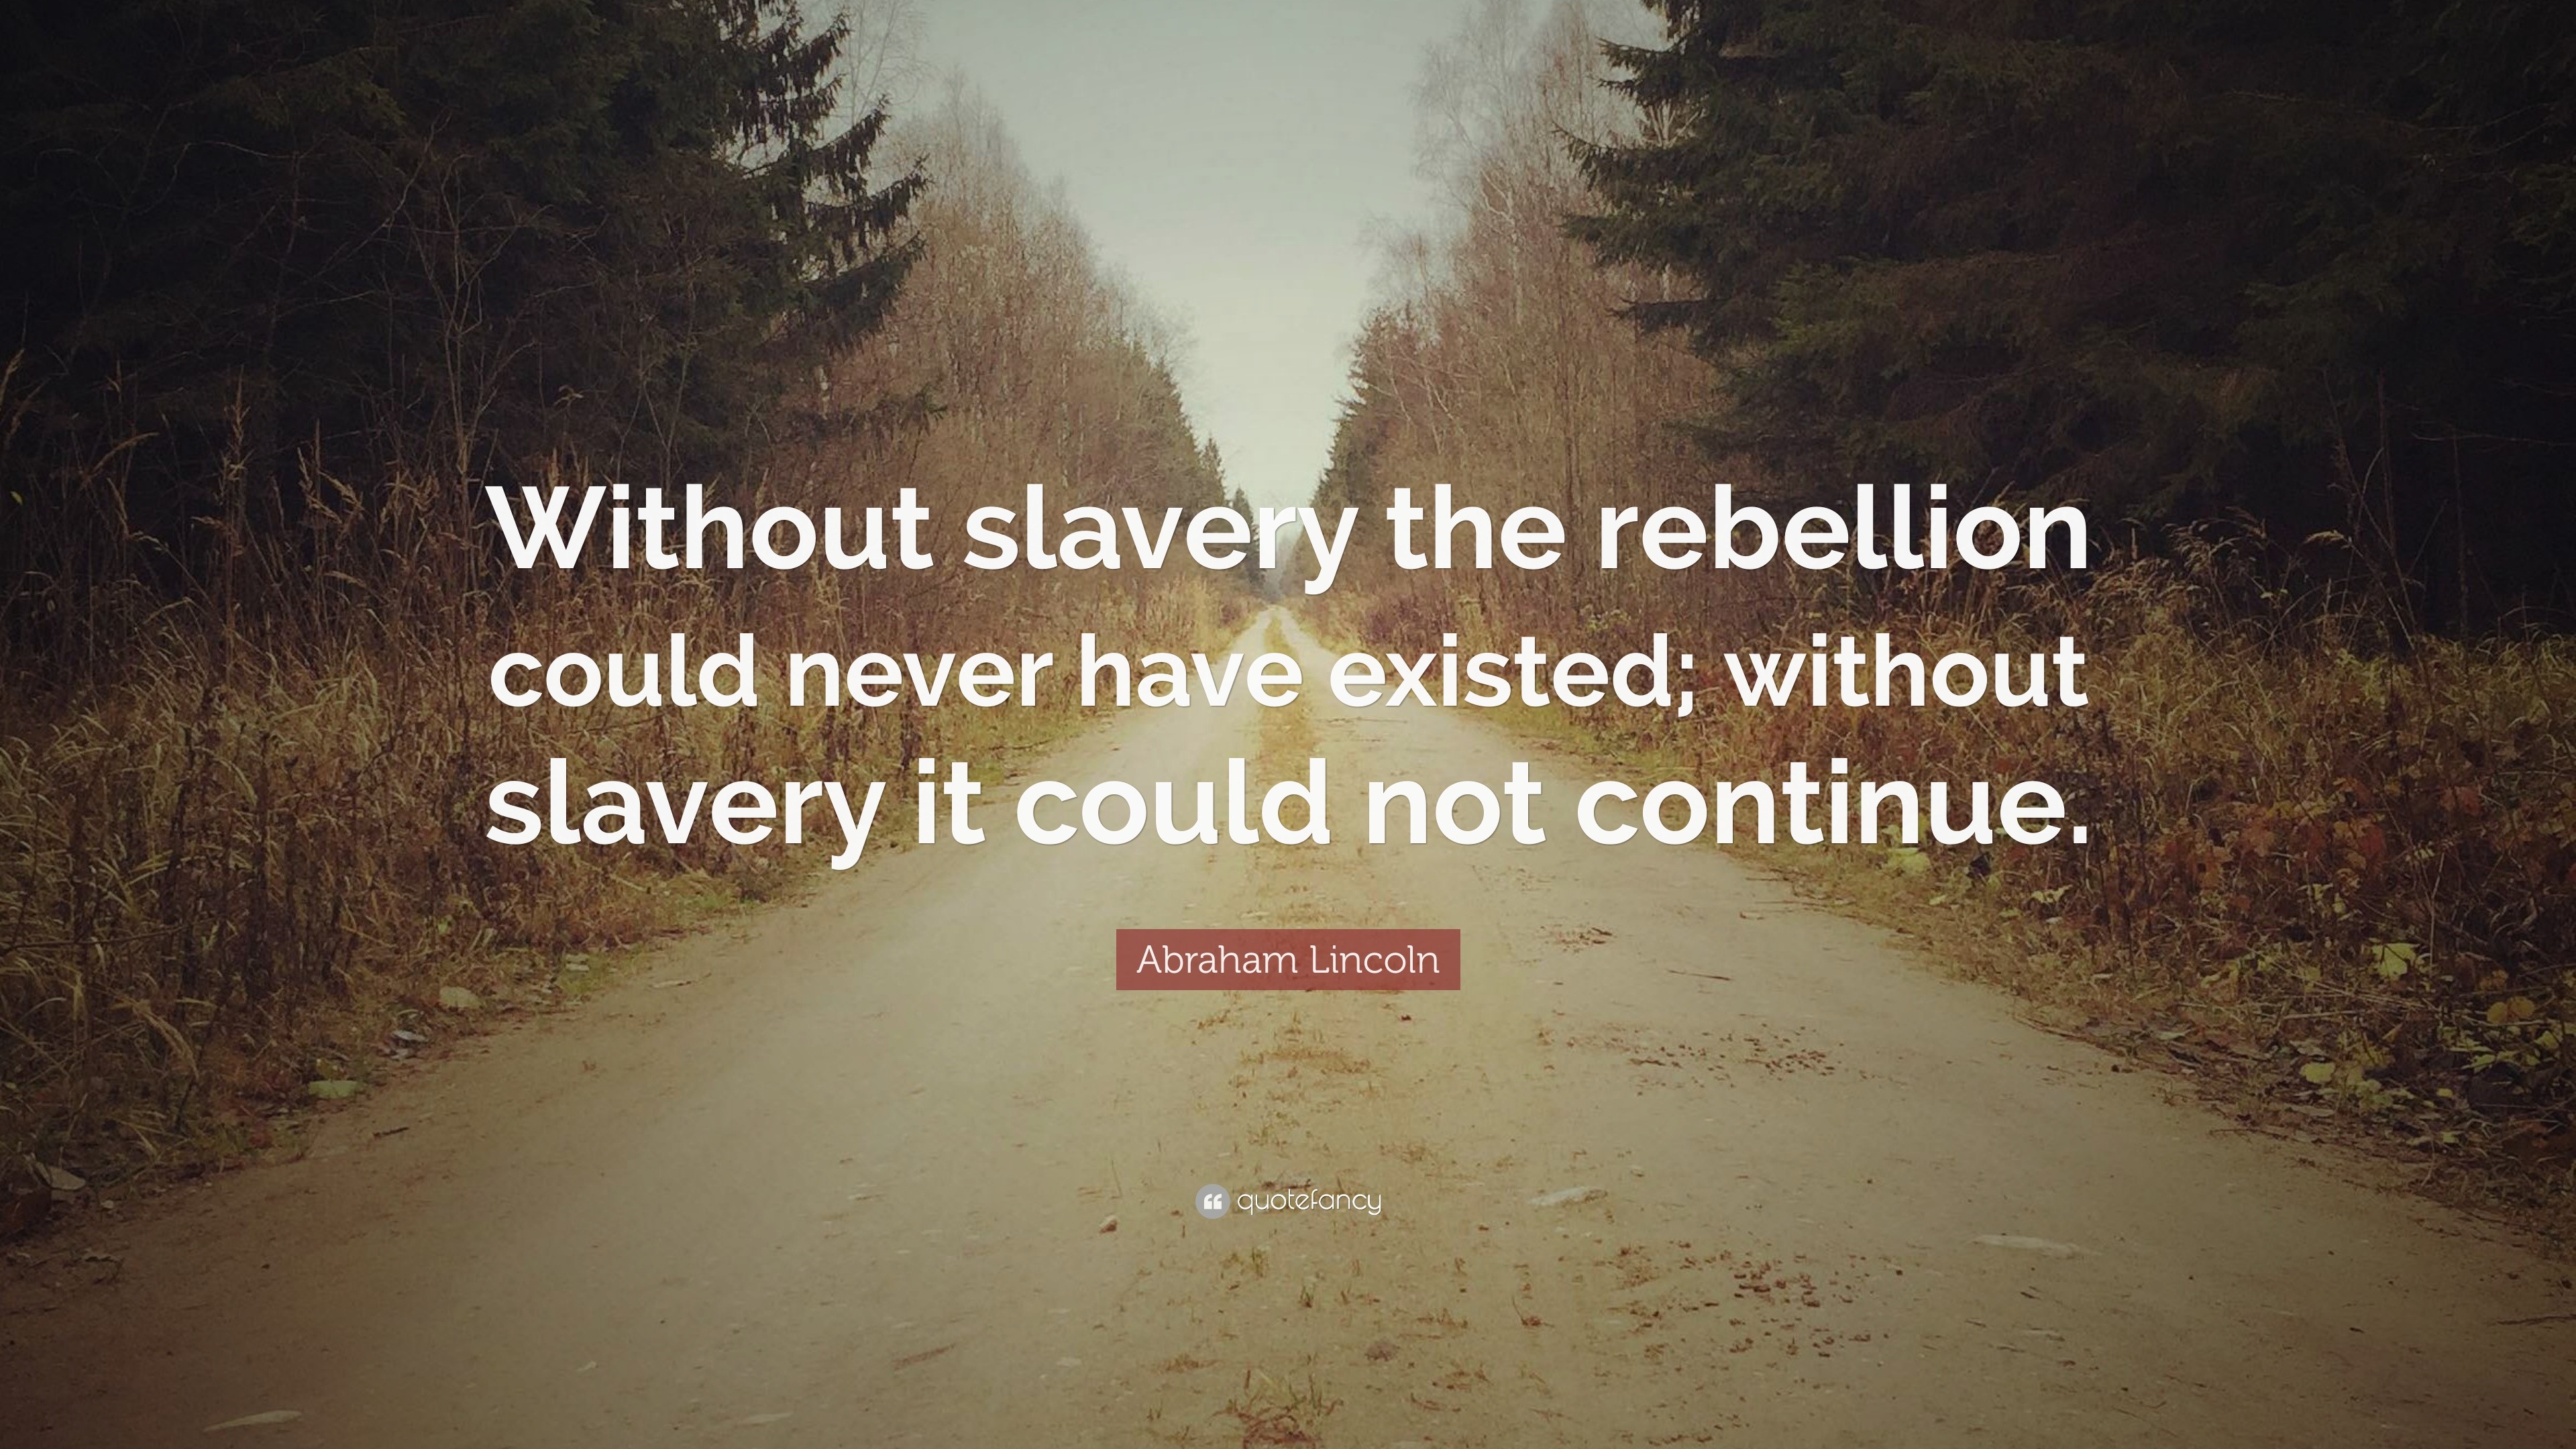 Abraham Lincoln Quote: “Without slavery the rebellion could never have ...